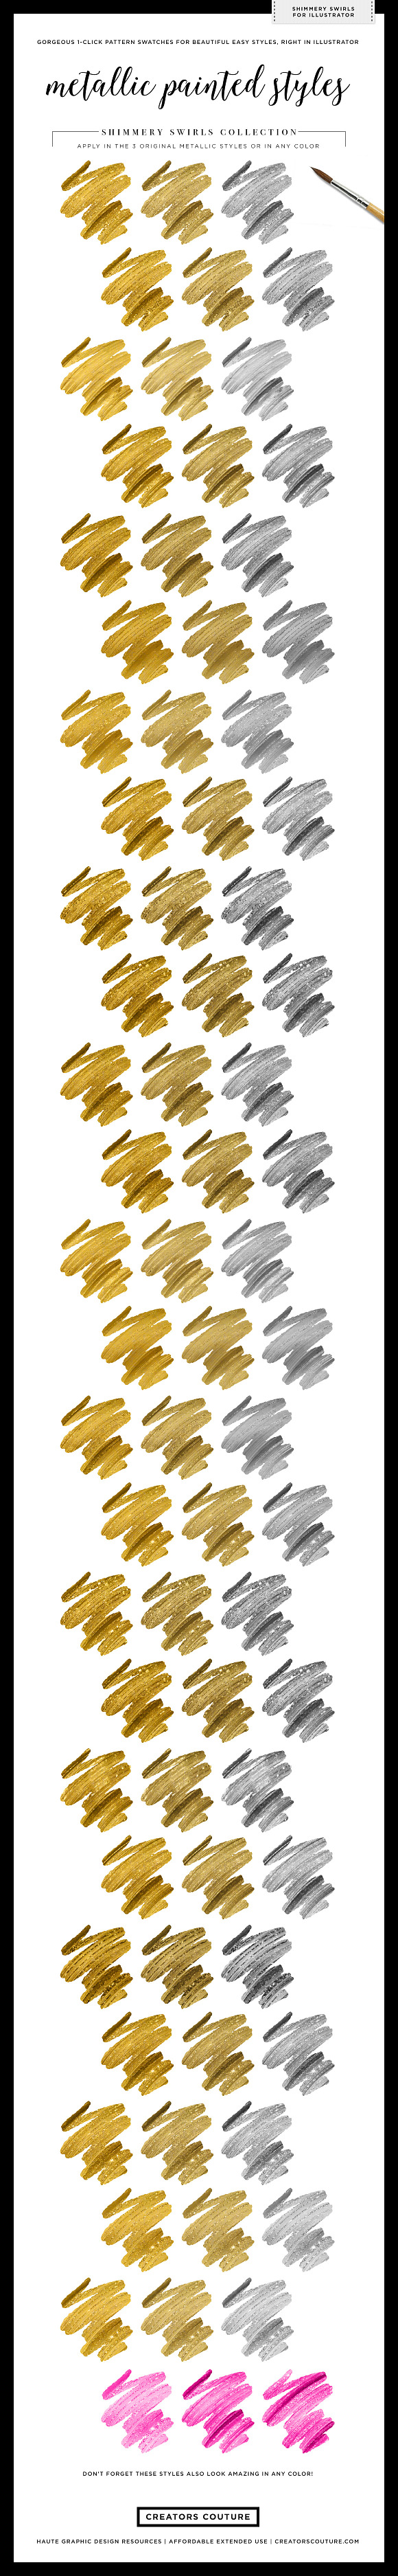 Shimmery Gold Styles for Illustrator in Photoshop Color Palettes - product preview 3